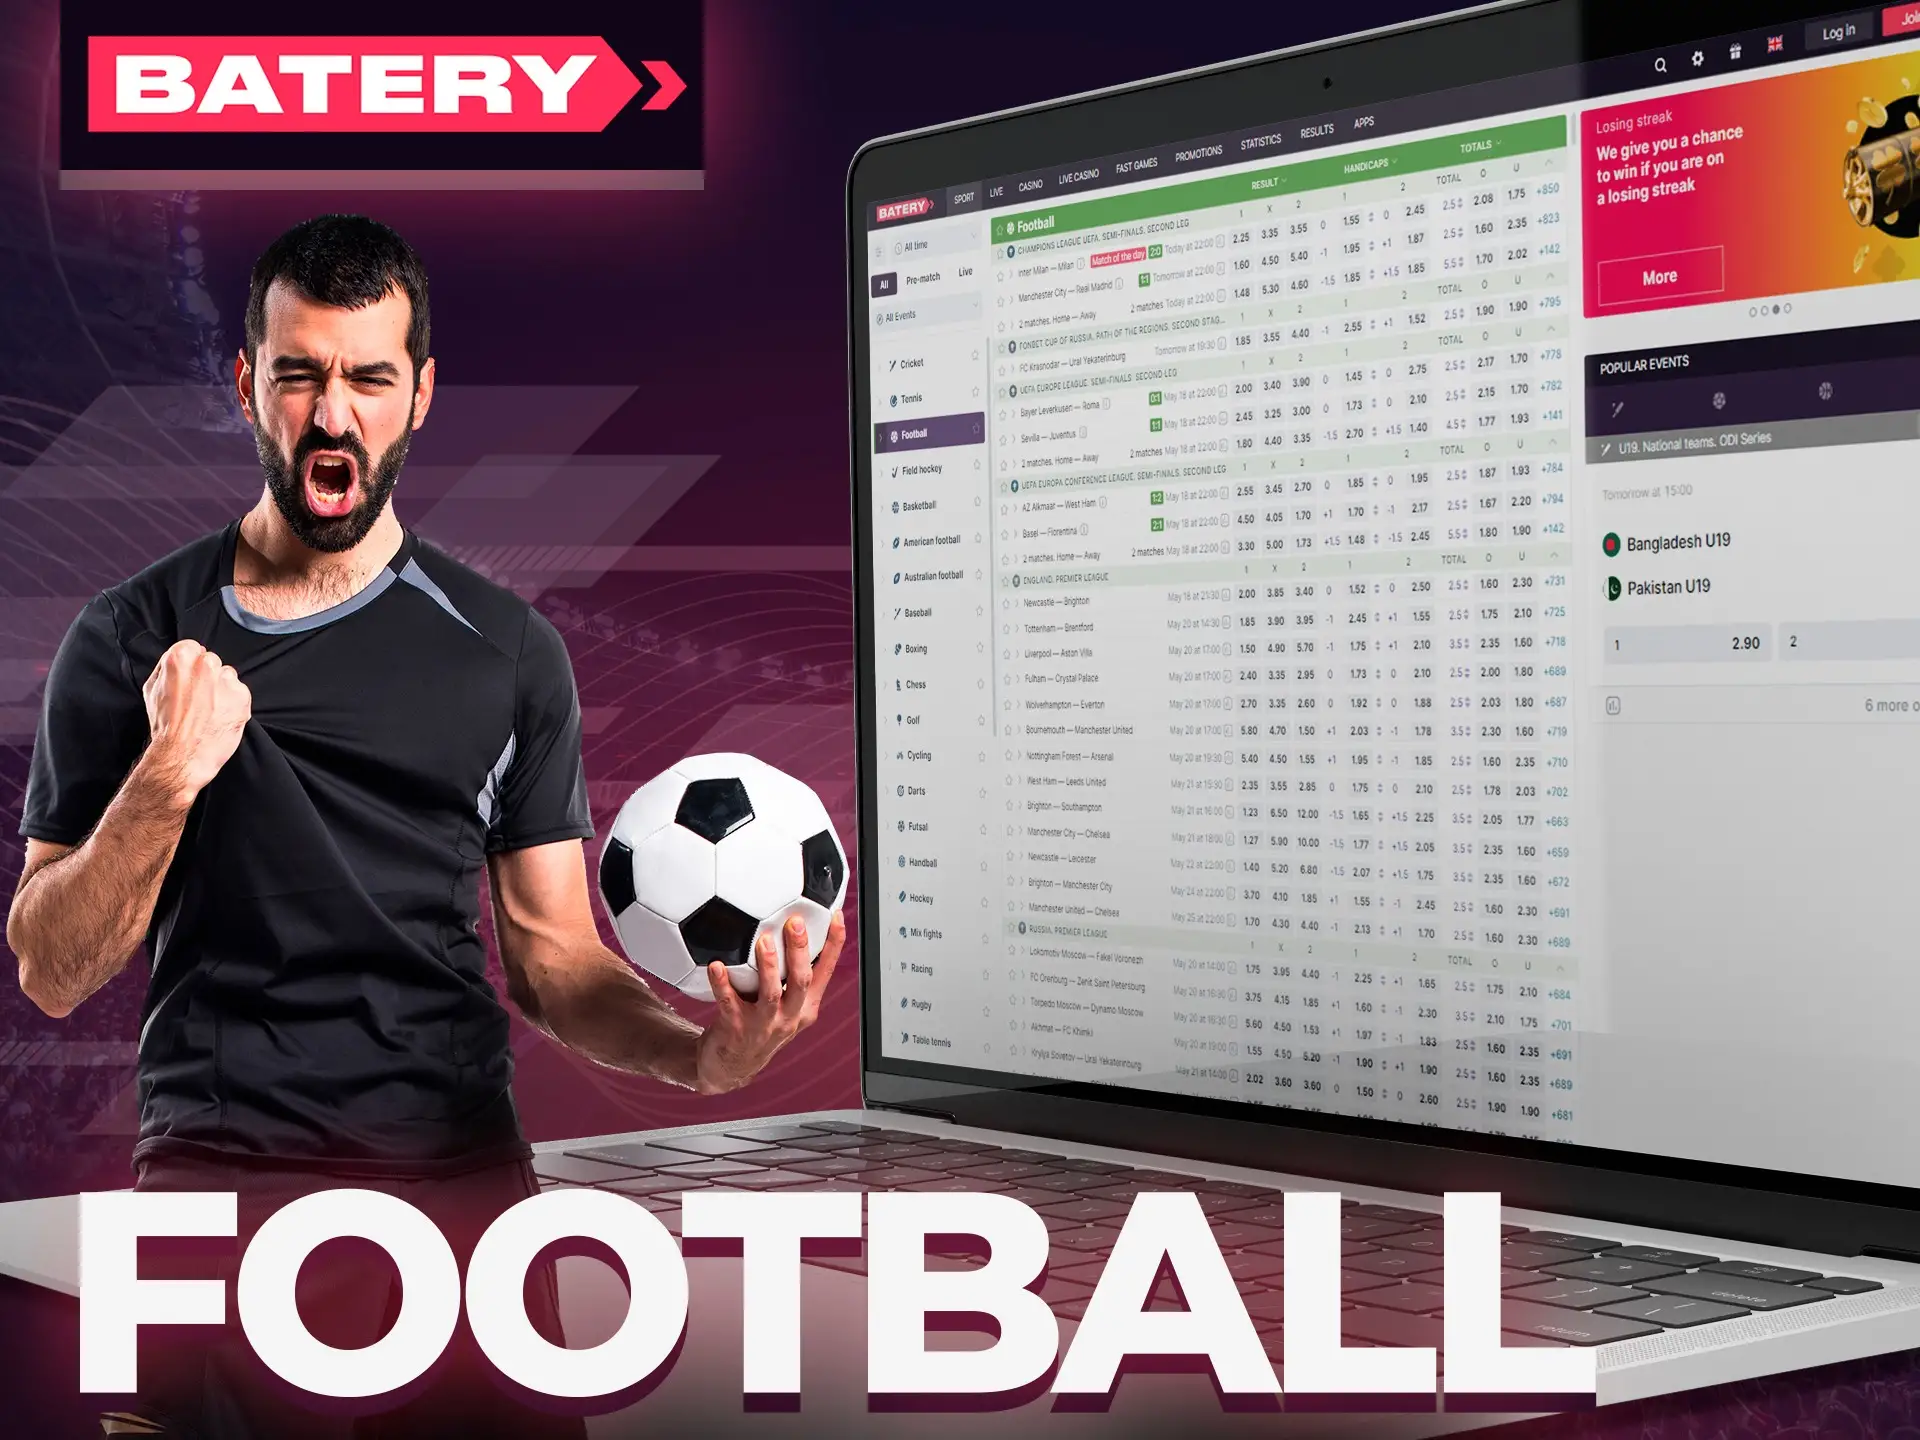 Bet on matches of biggest football tournaments at Batery.